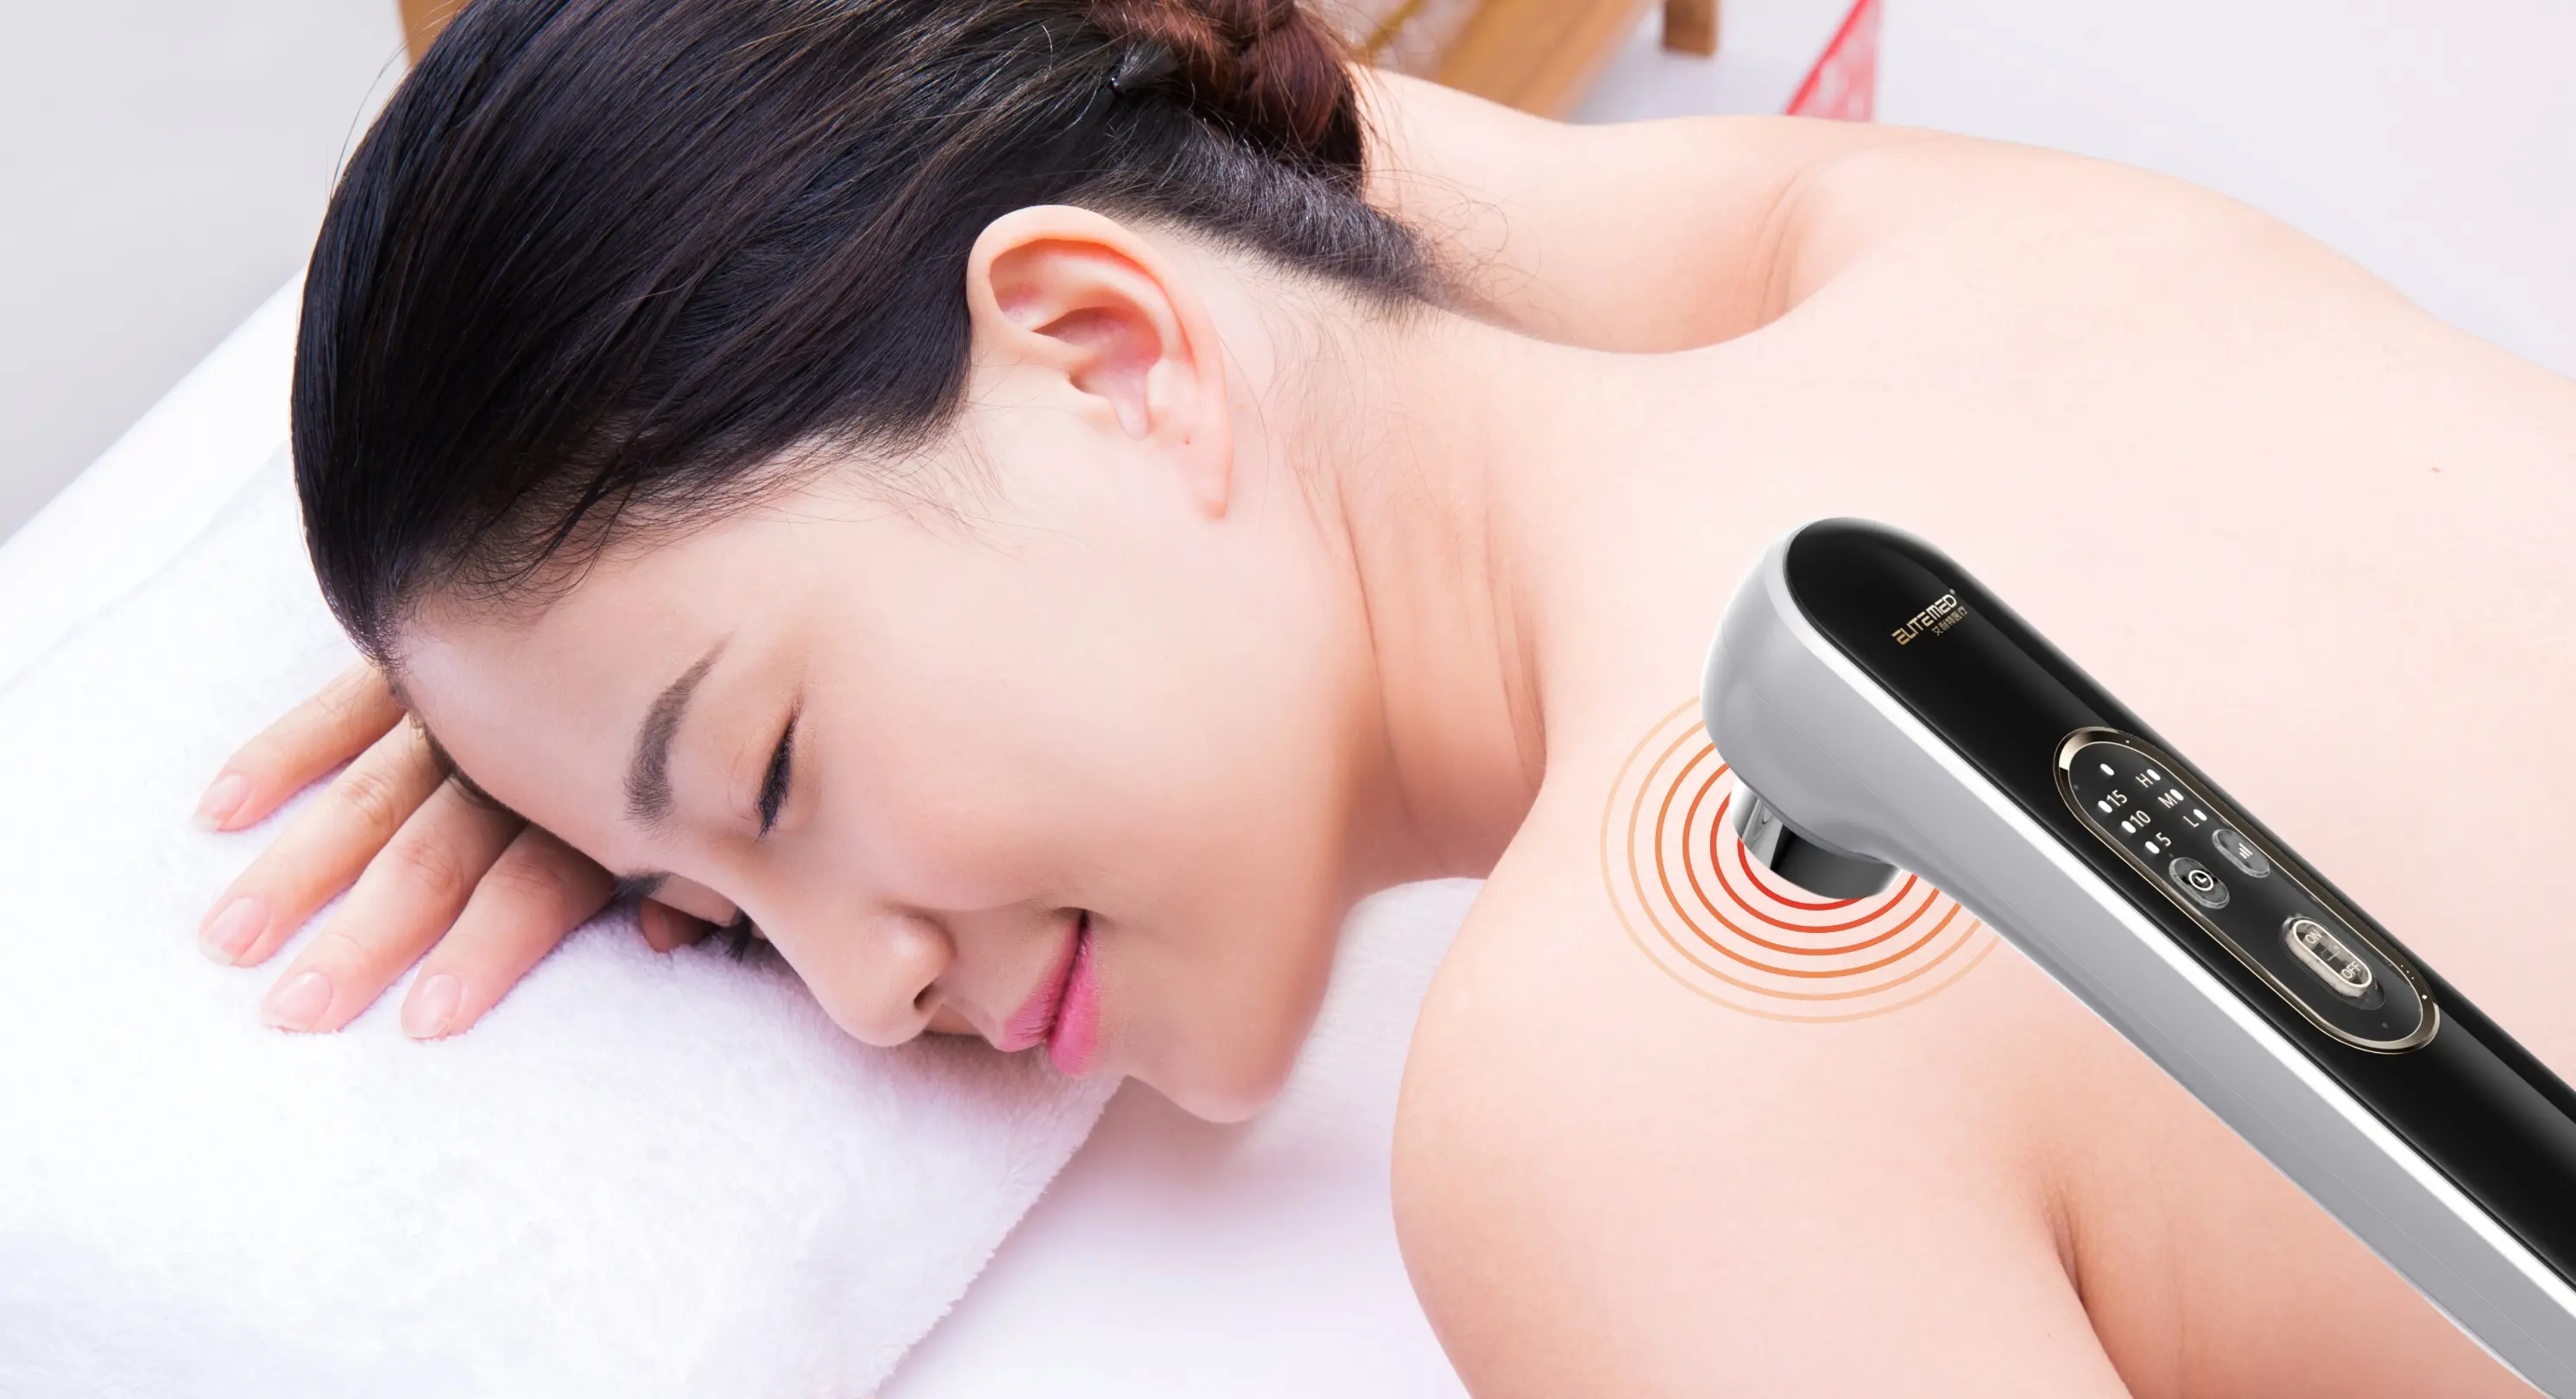 Most Advanced Ultrasound Therapy Device for Physiotherapy - GZ Longest